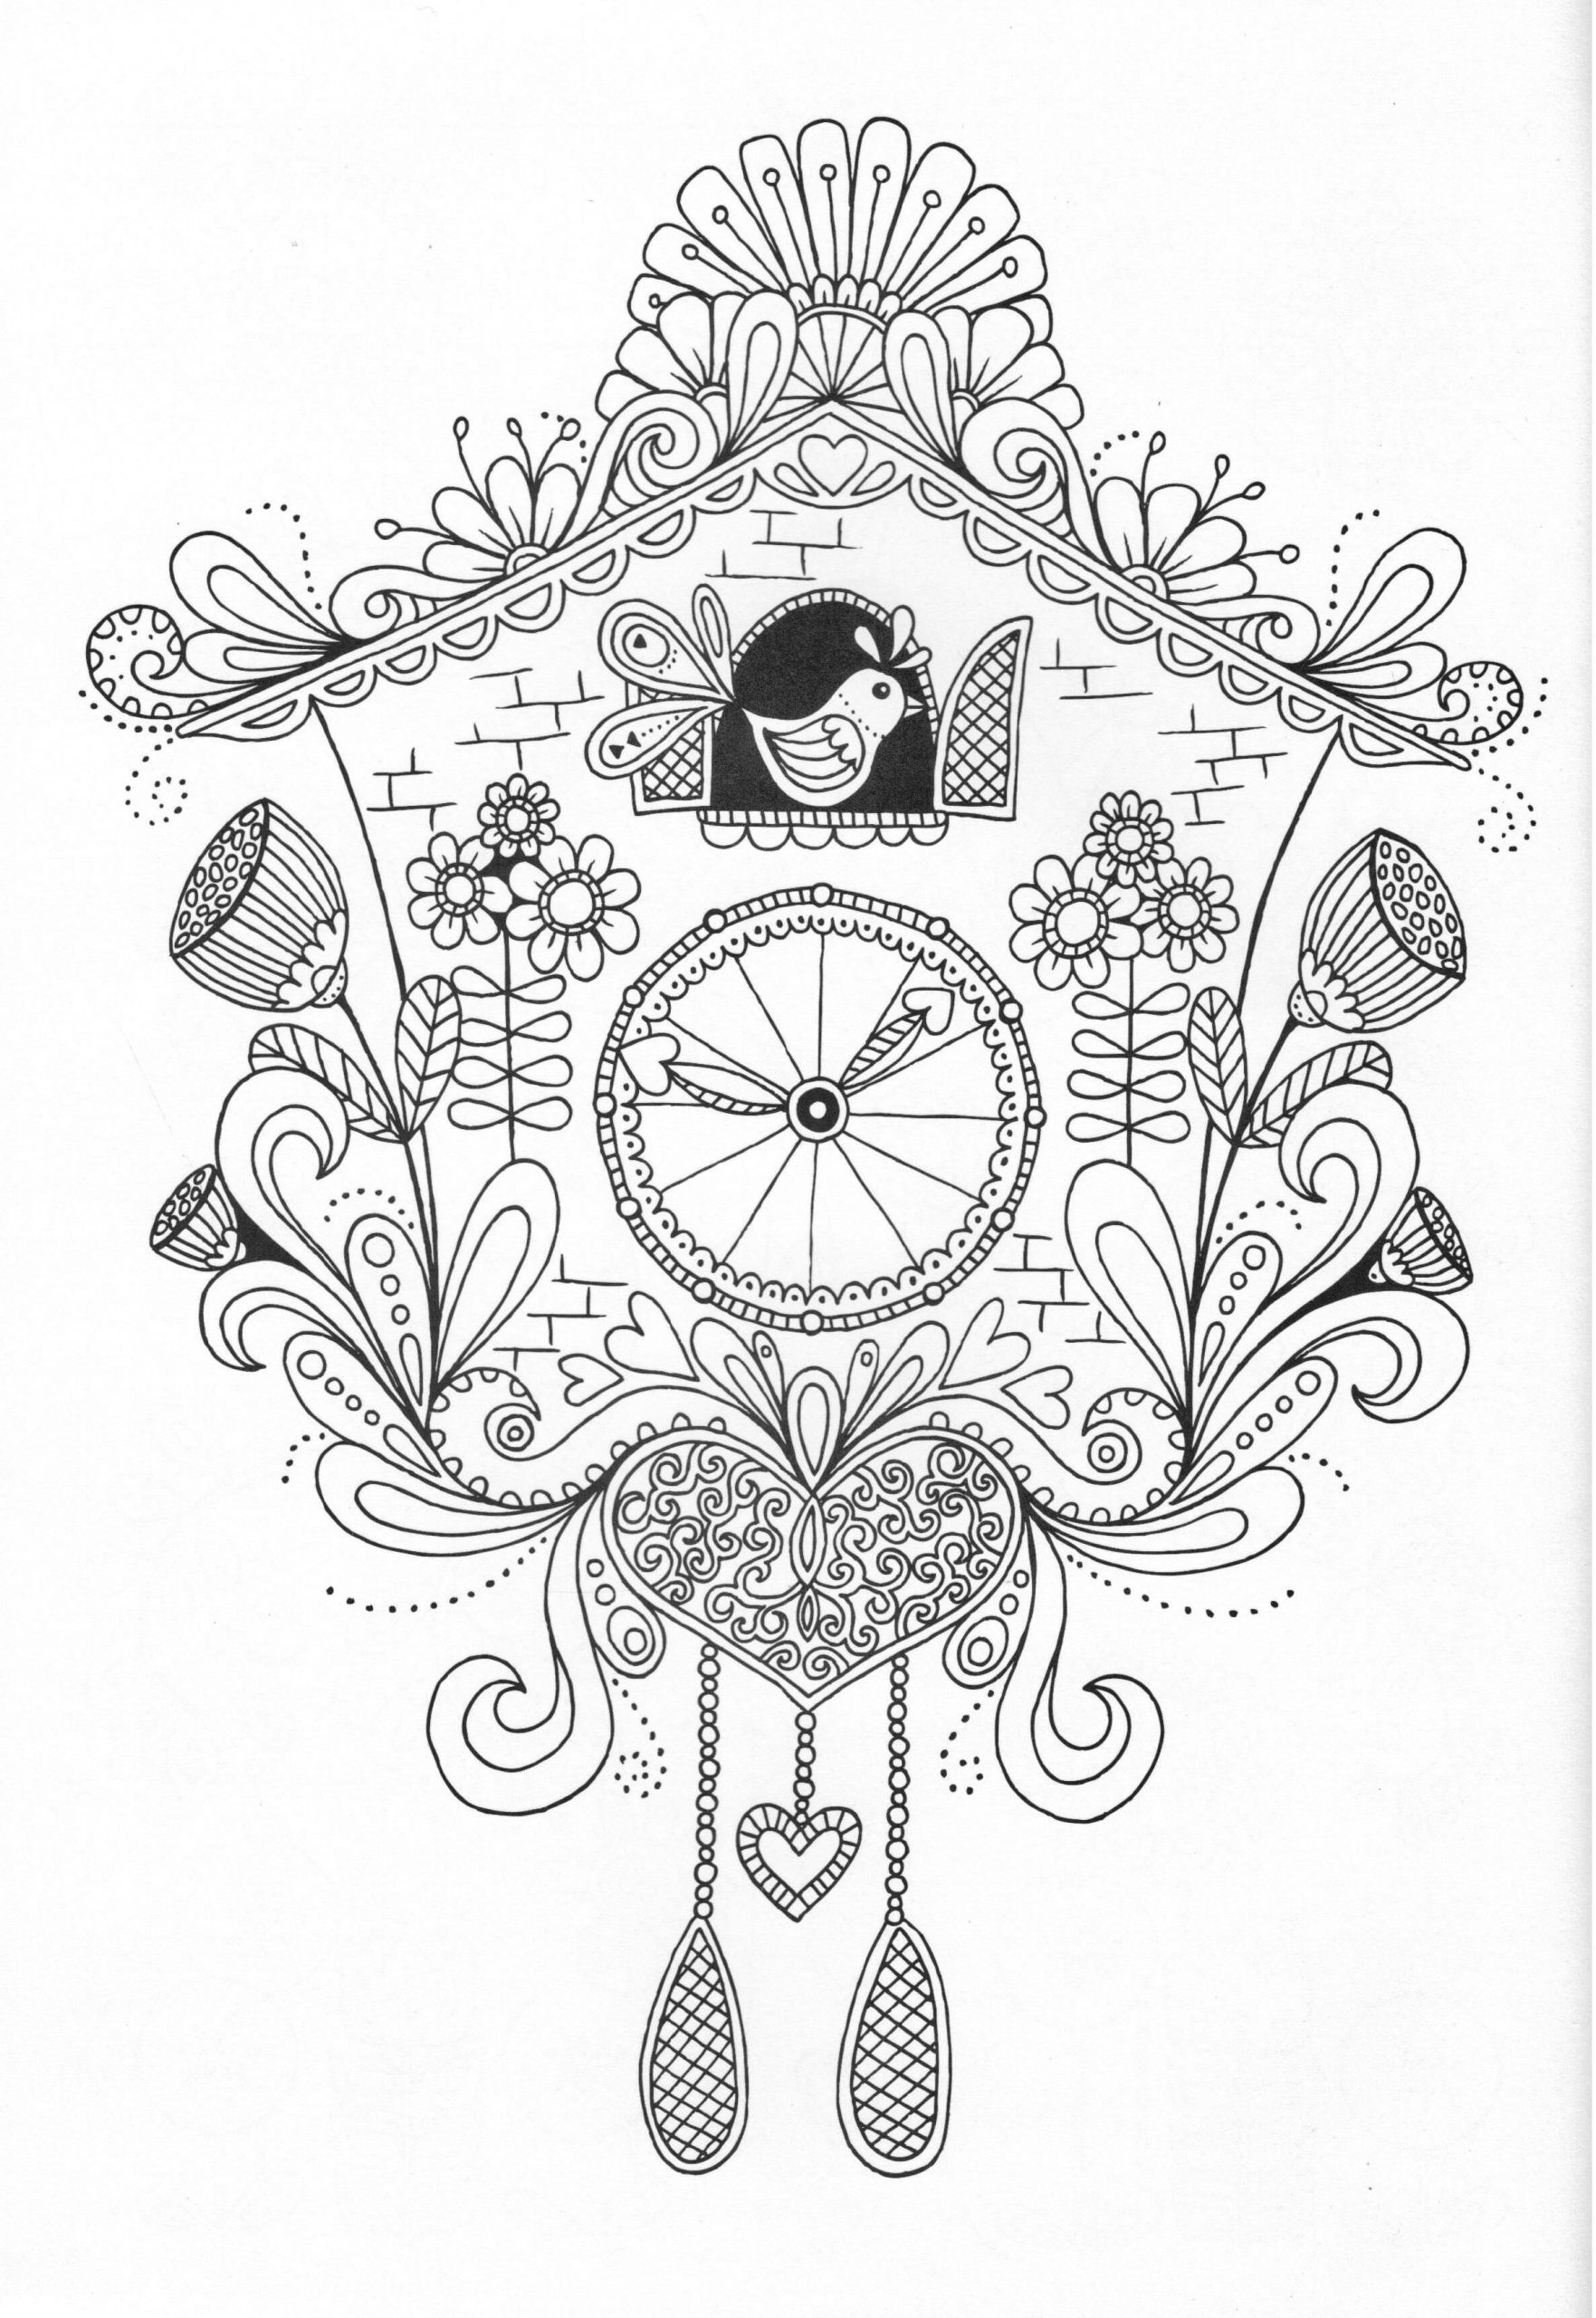 Large Print Coloring Pages For Adults
 Pin by DeAnna Lea on Raven s Grown Up Coloring